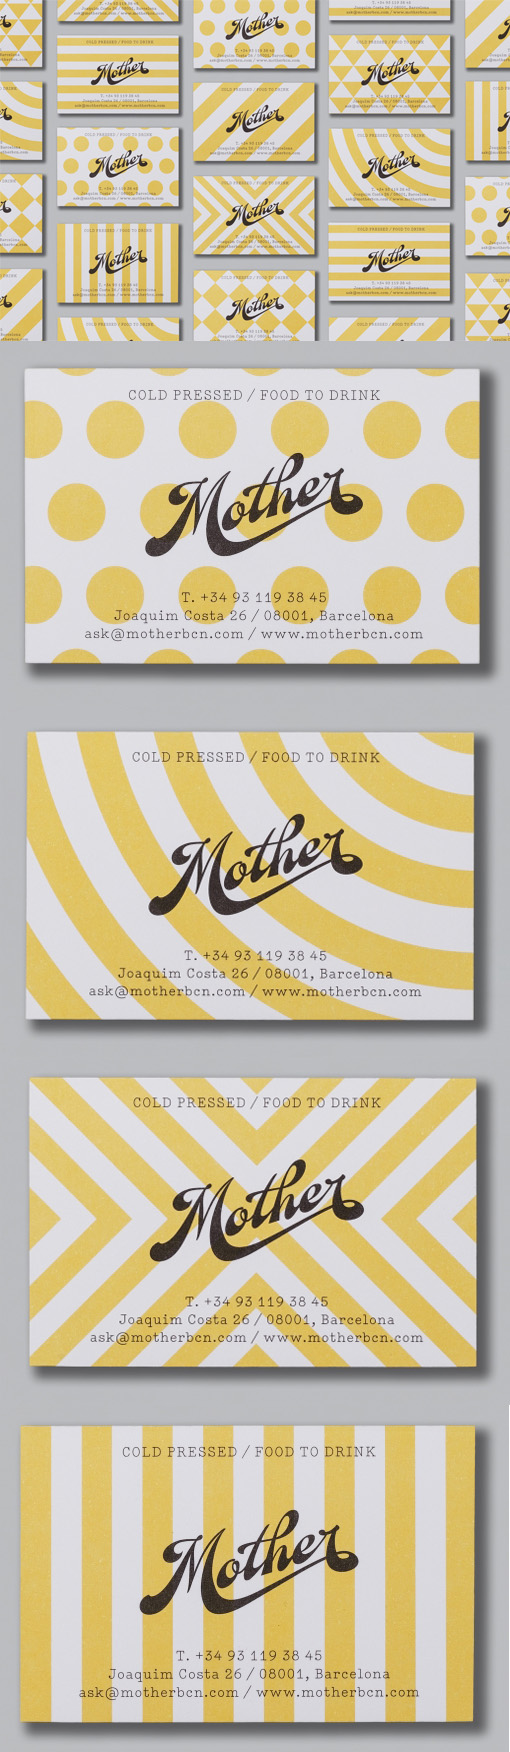 Bold Patterns Show Off Great Typography On A Business Card For A Natural Beverage Company